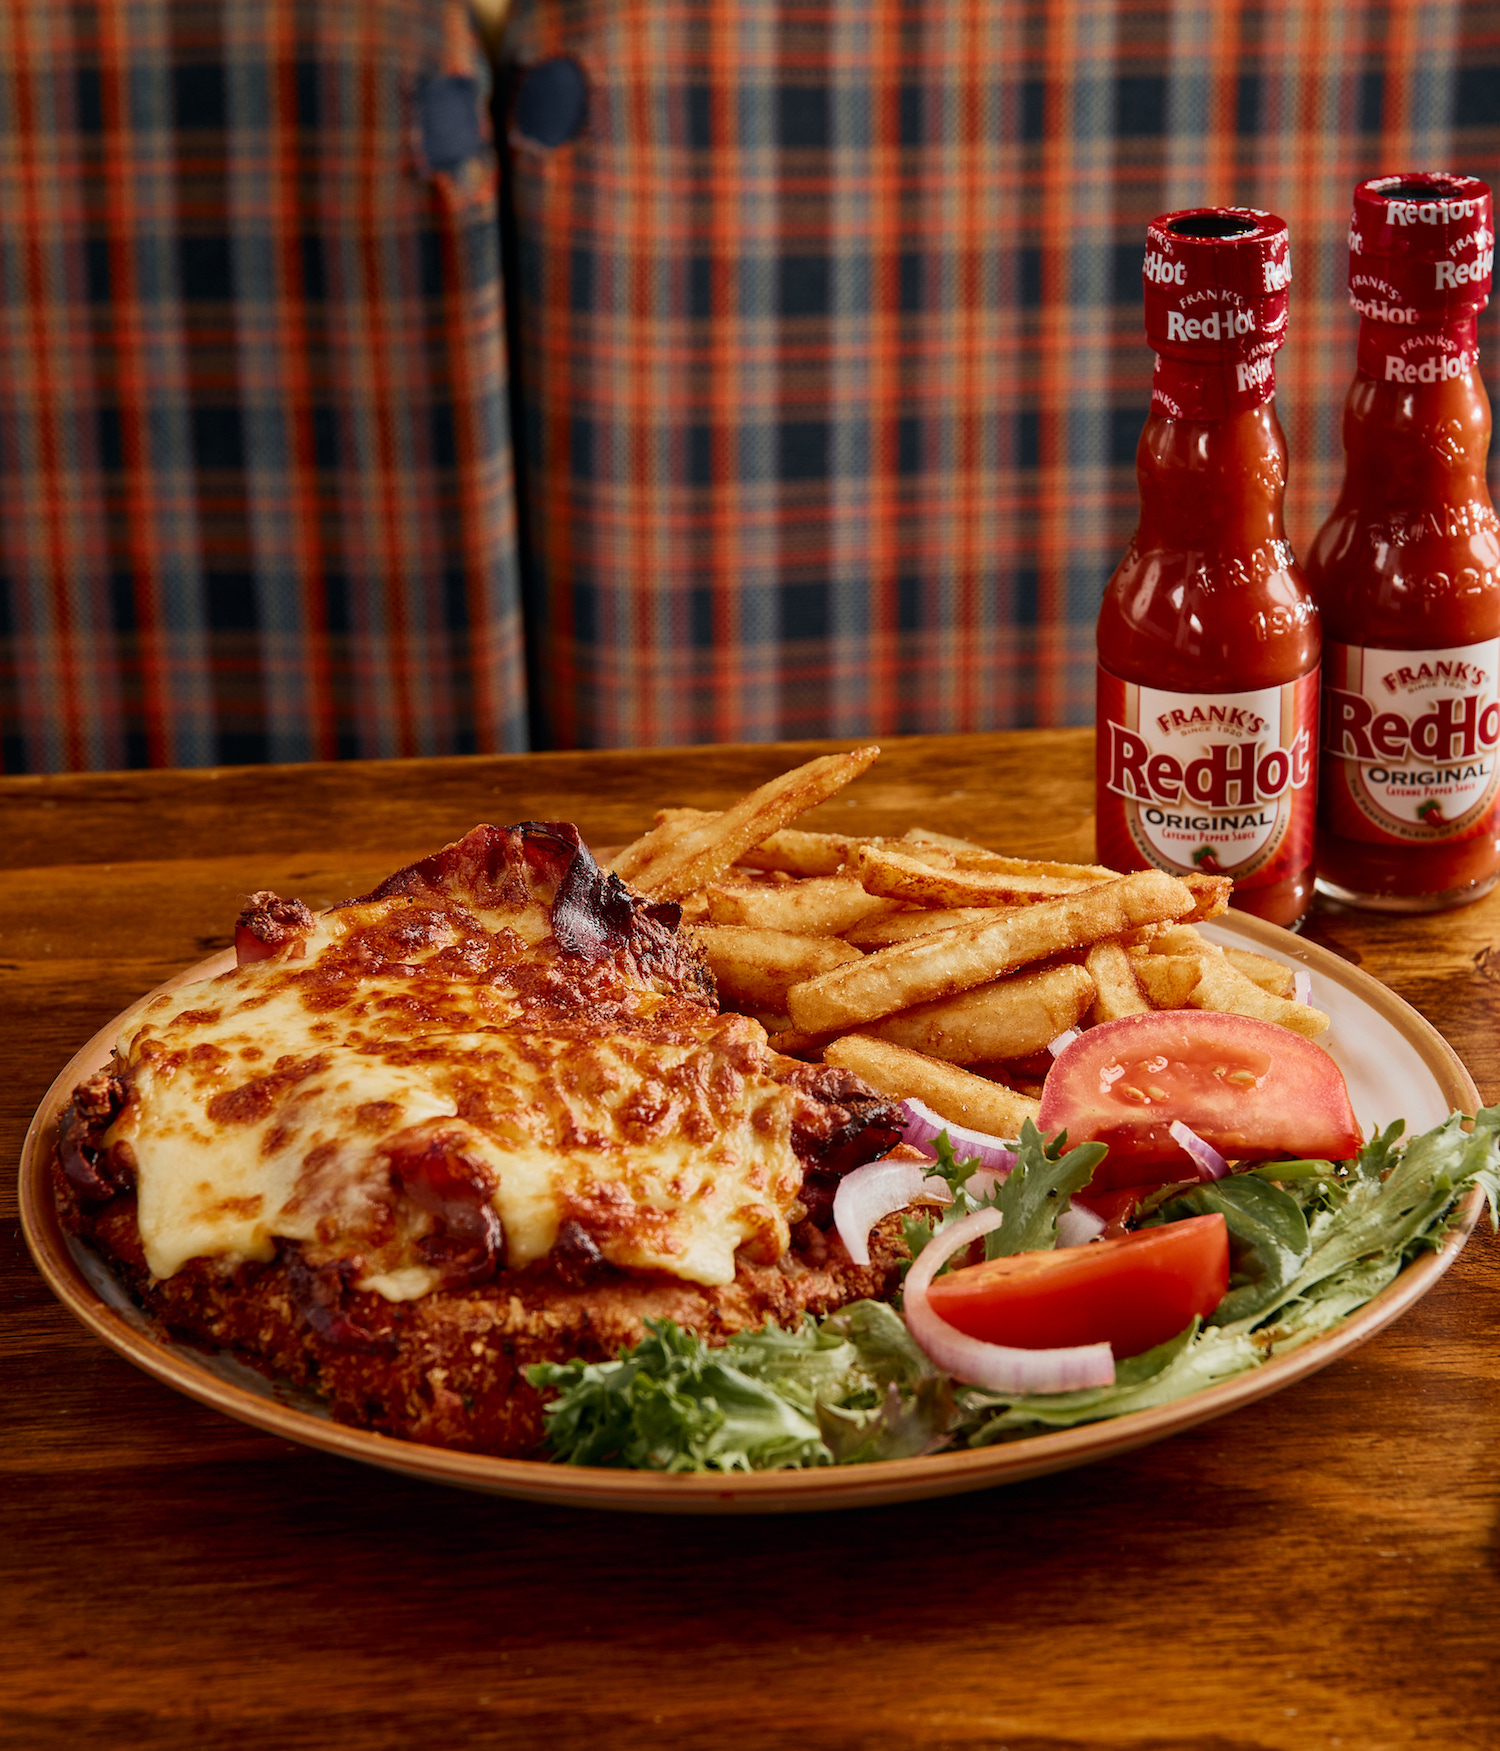 A cheesy chicken parma sits next to two bottles of Franks RedHot Sauce